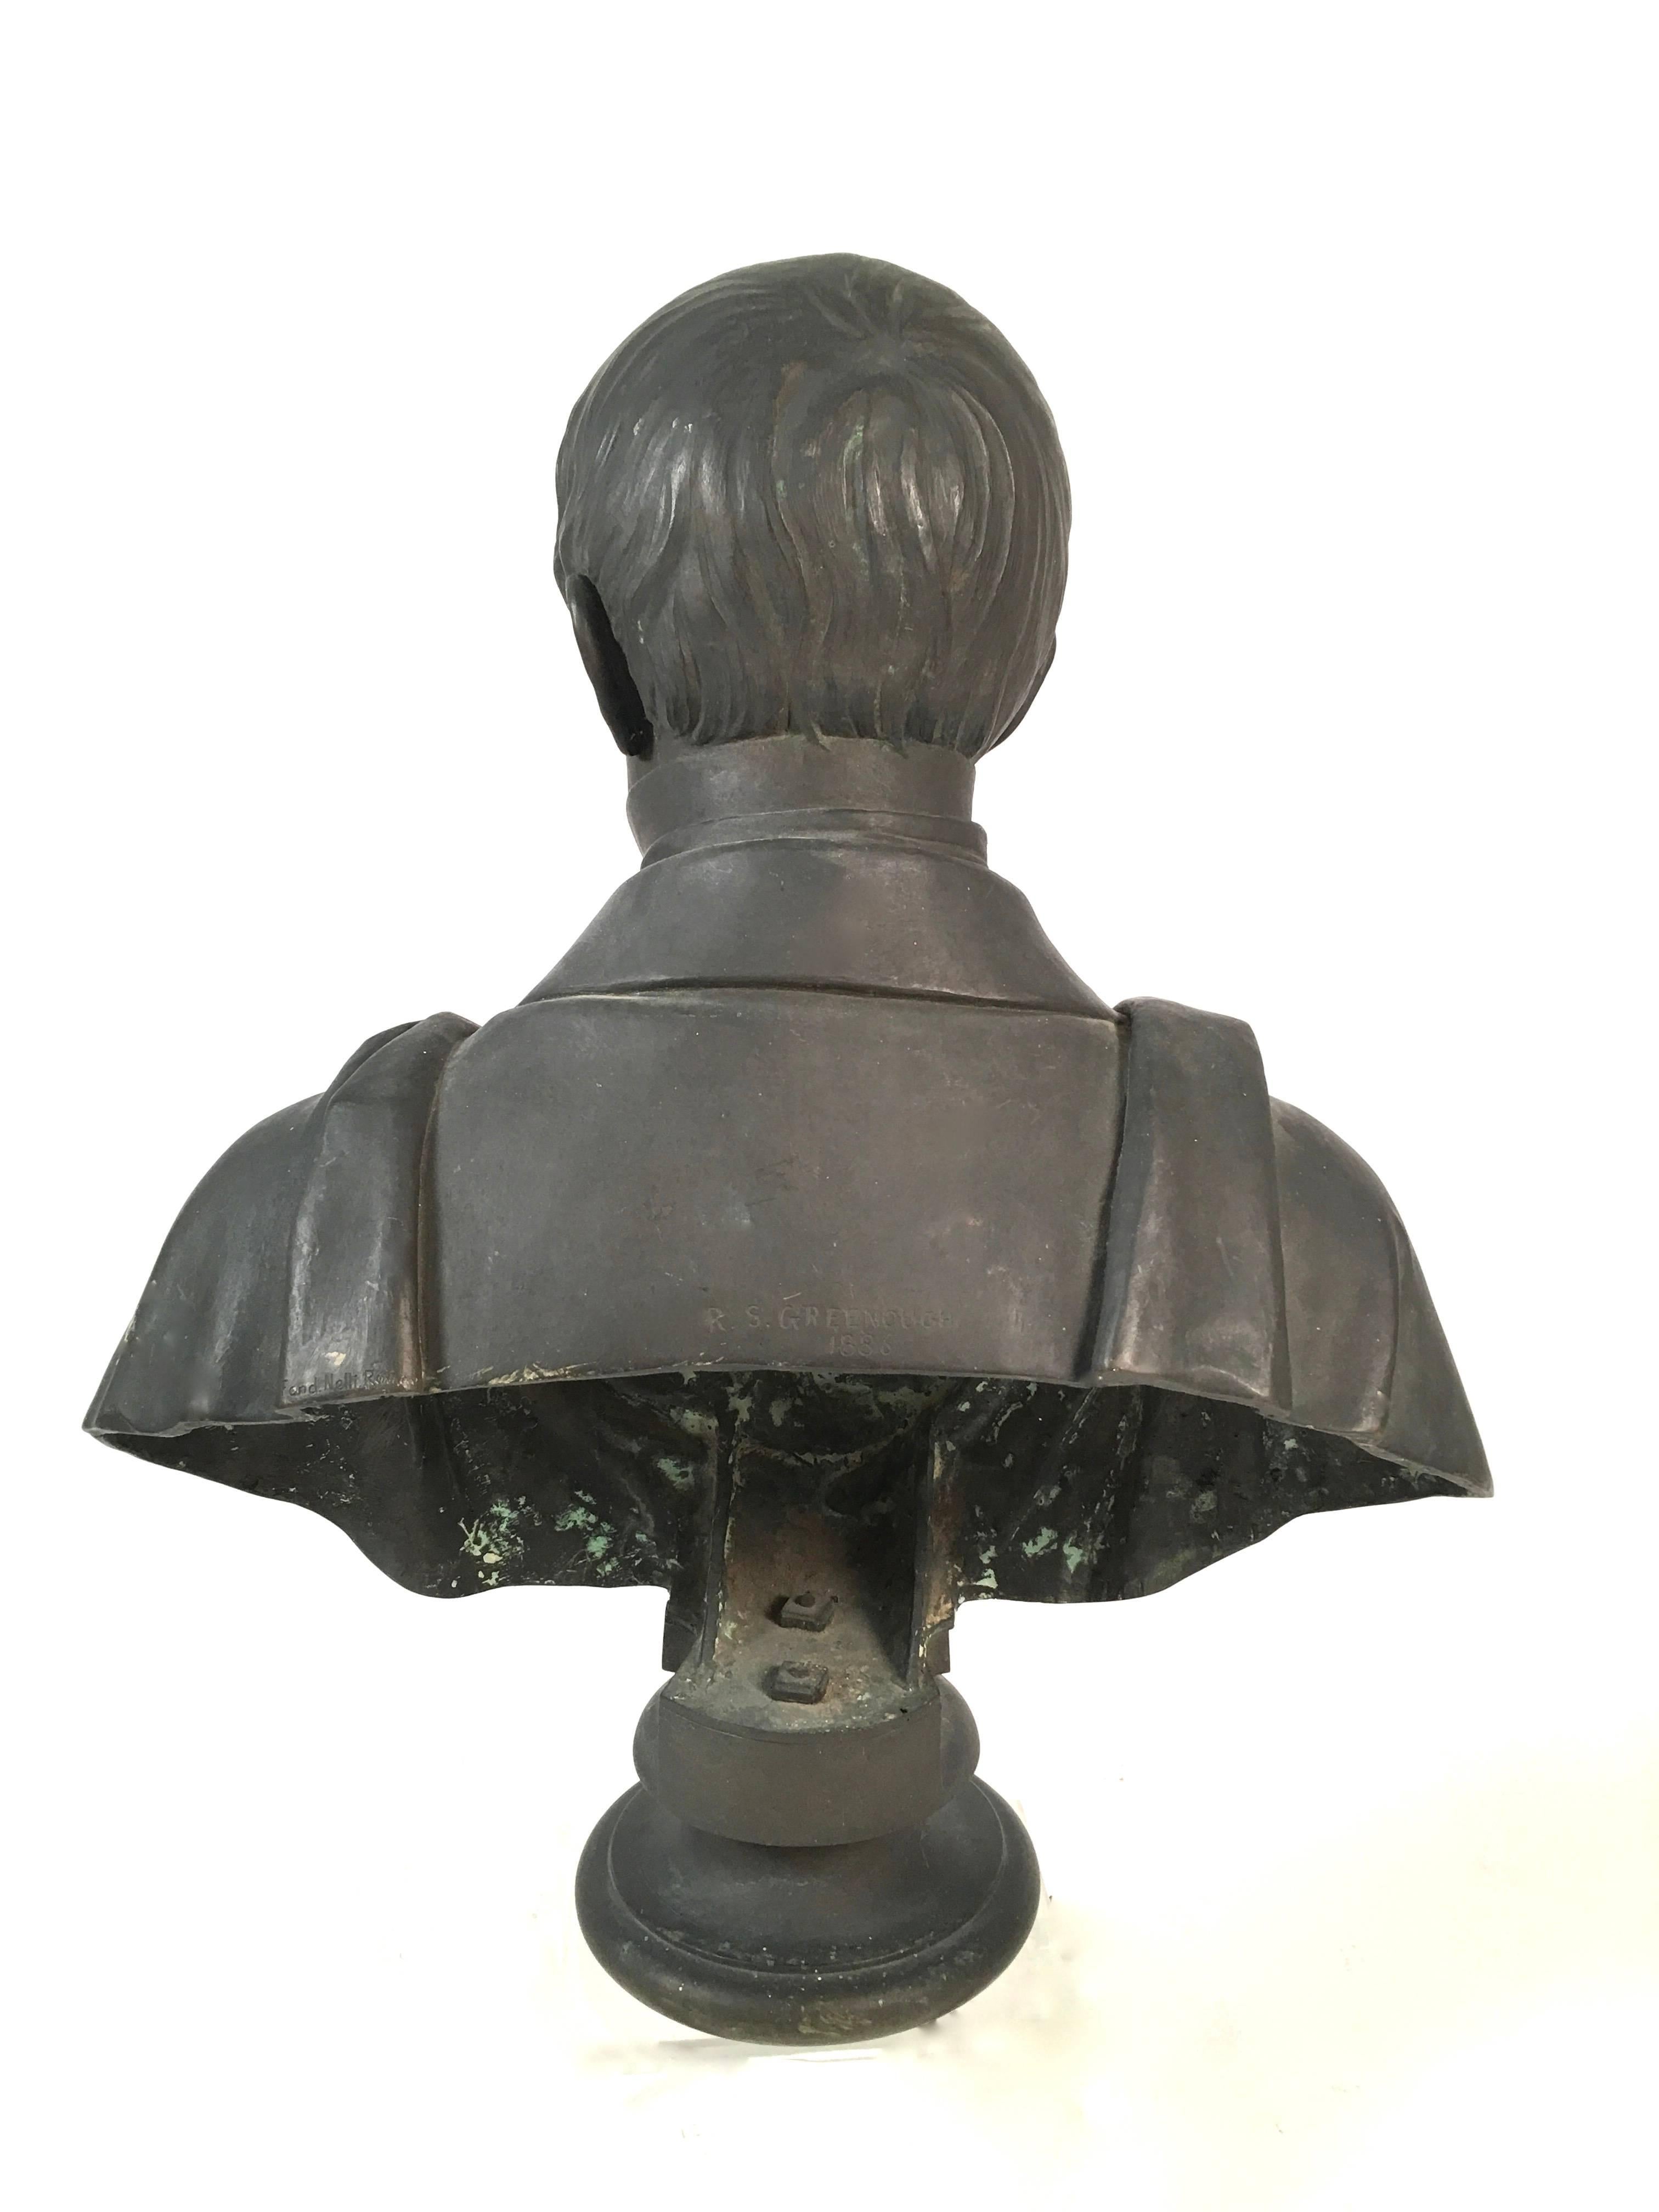 A 19th century neoclassical bronze portrait bust of Theodore Lyman (1833-1897), a prominent Bostonian natural scientist, Lieutenant Colonel during the Civil War and United States Representative from Massachusetts, by sculptor Richard Saltonstall